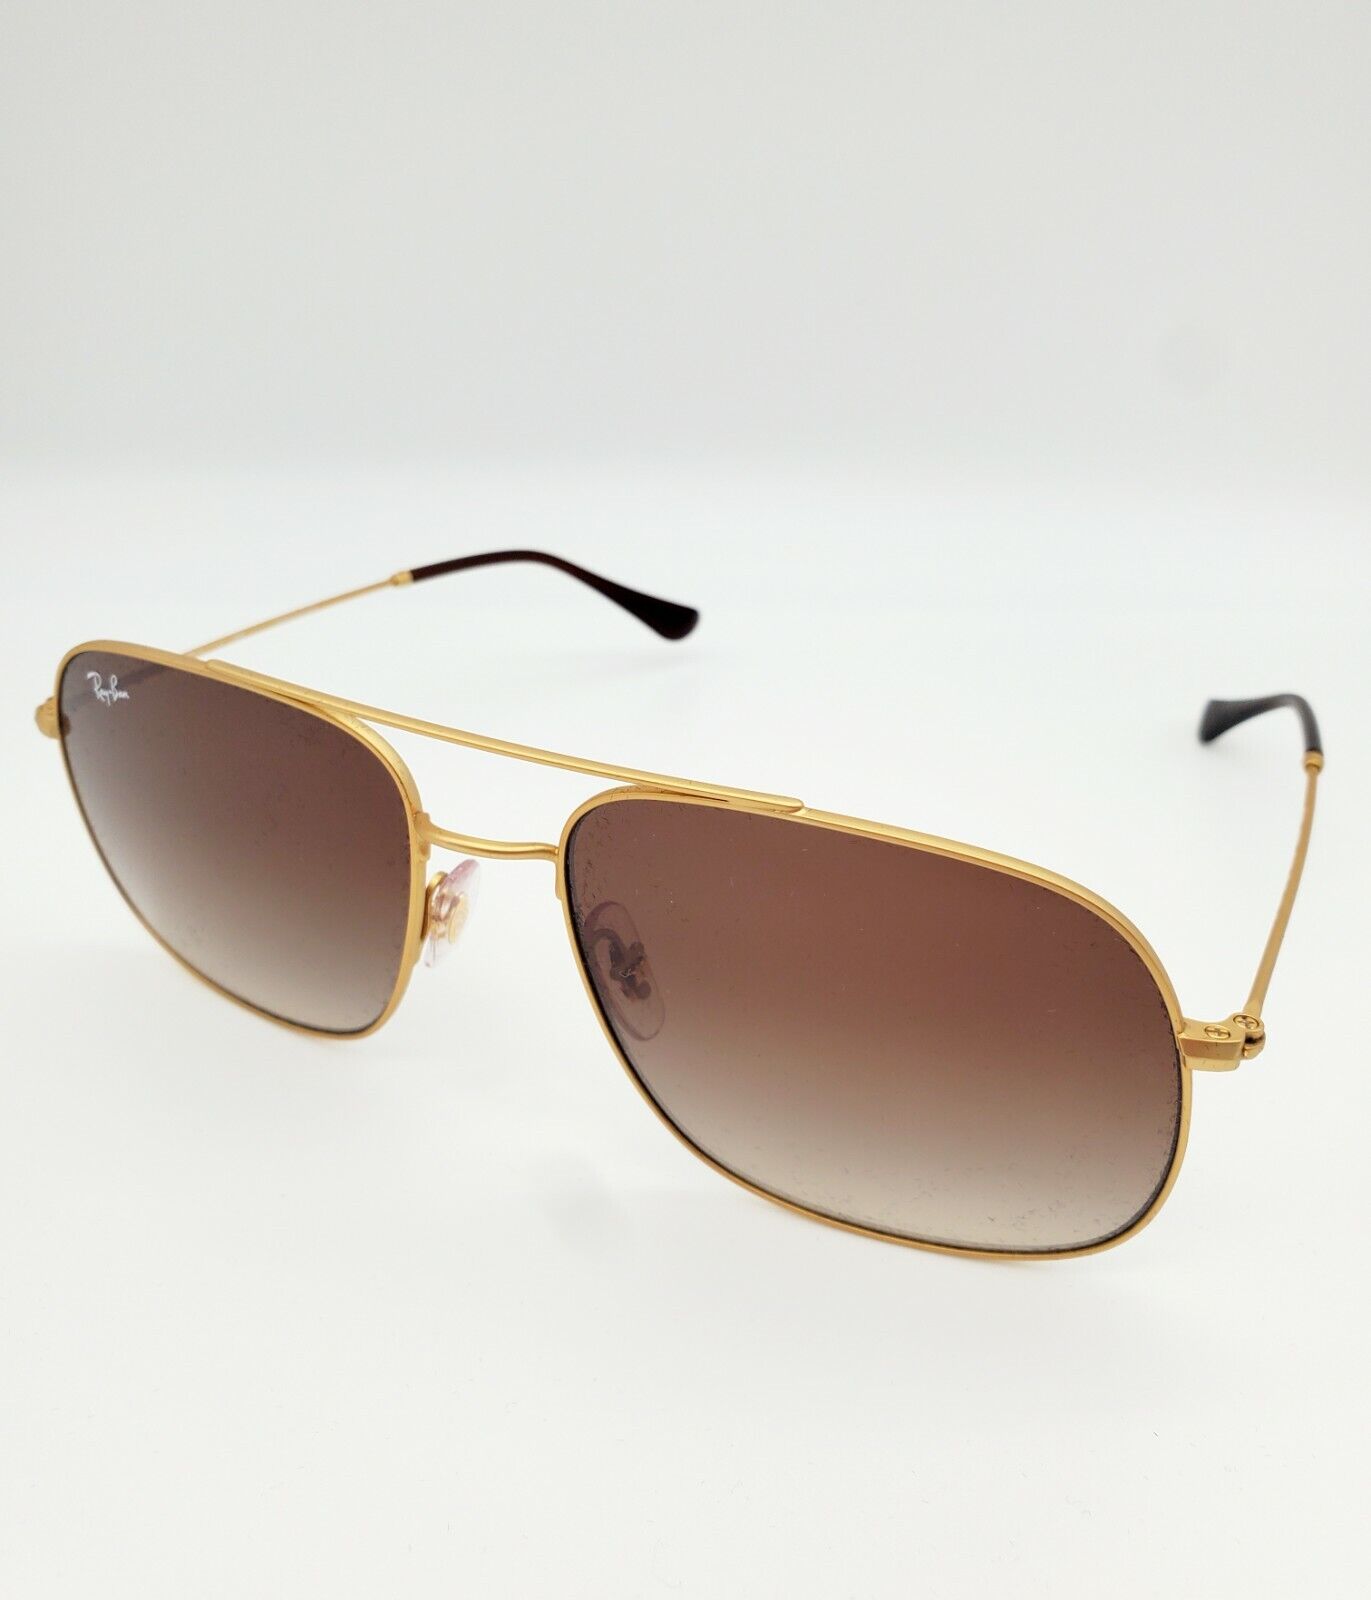 Ray Ban 0RB3595 ANDREA 901313 Gold/Brown Gradient Square Sunglasses